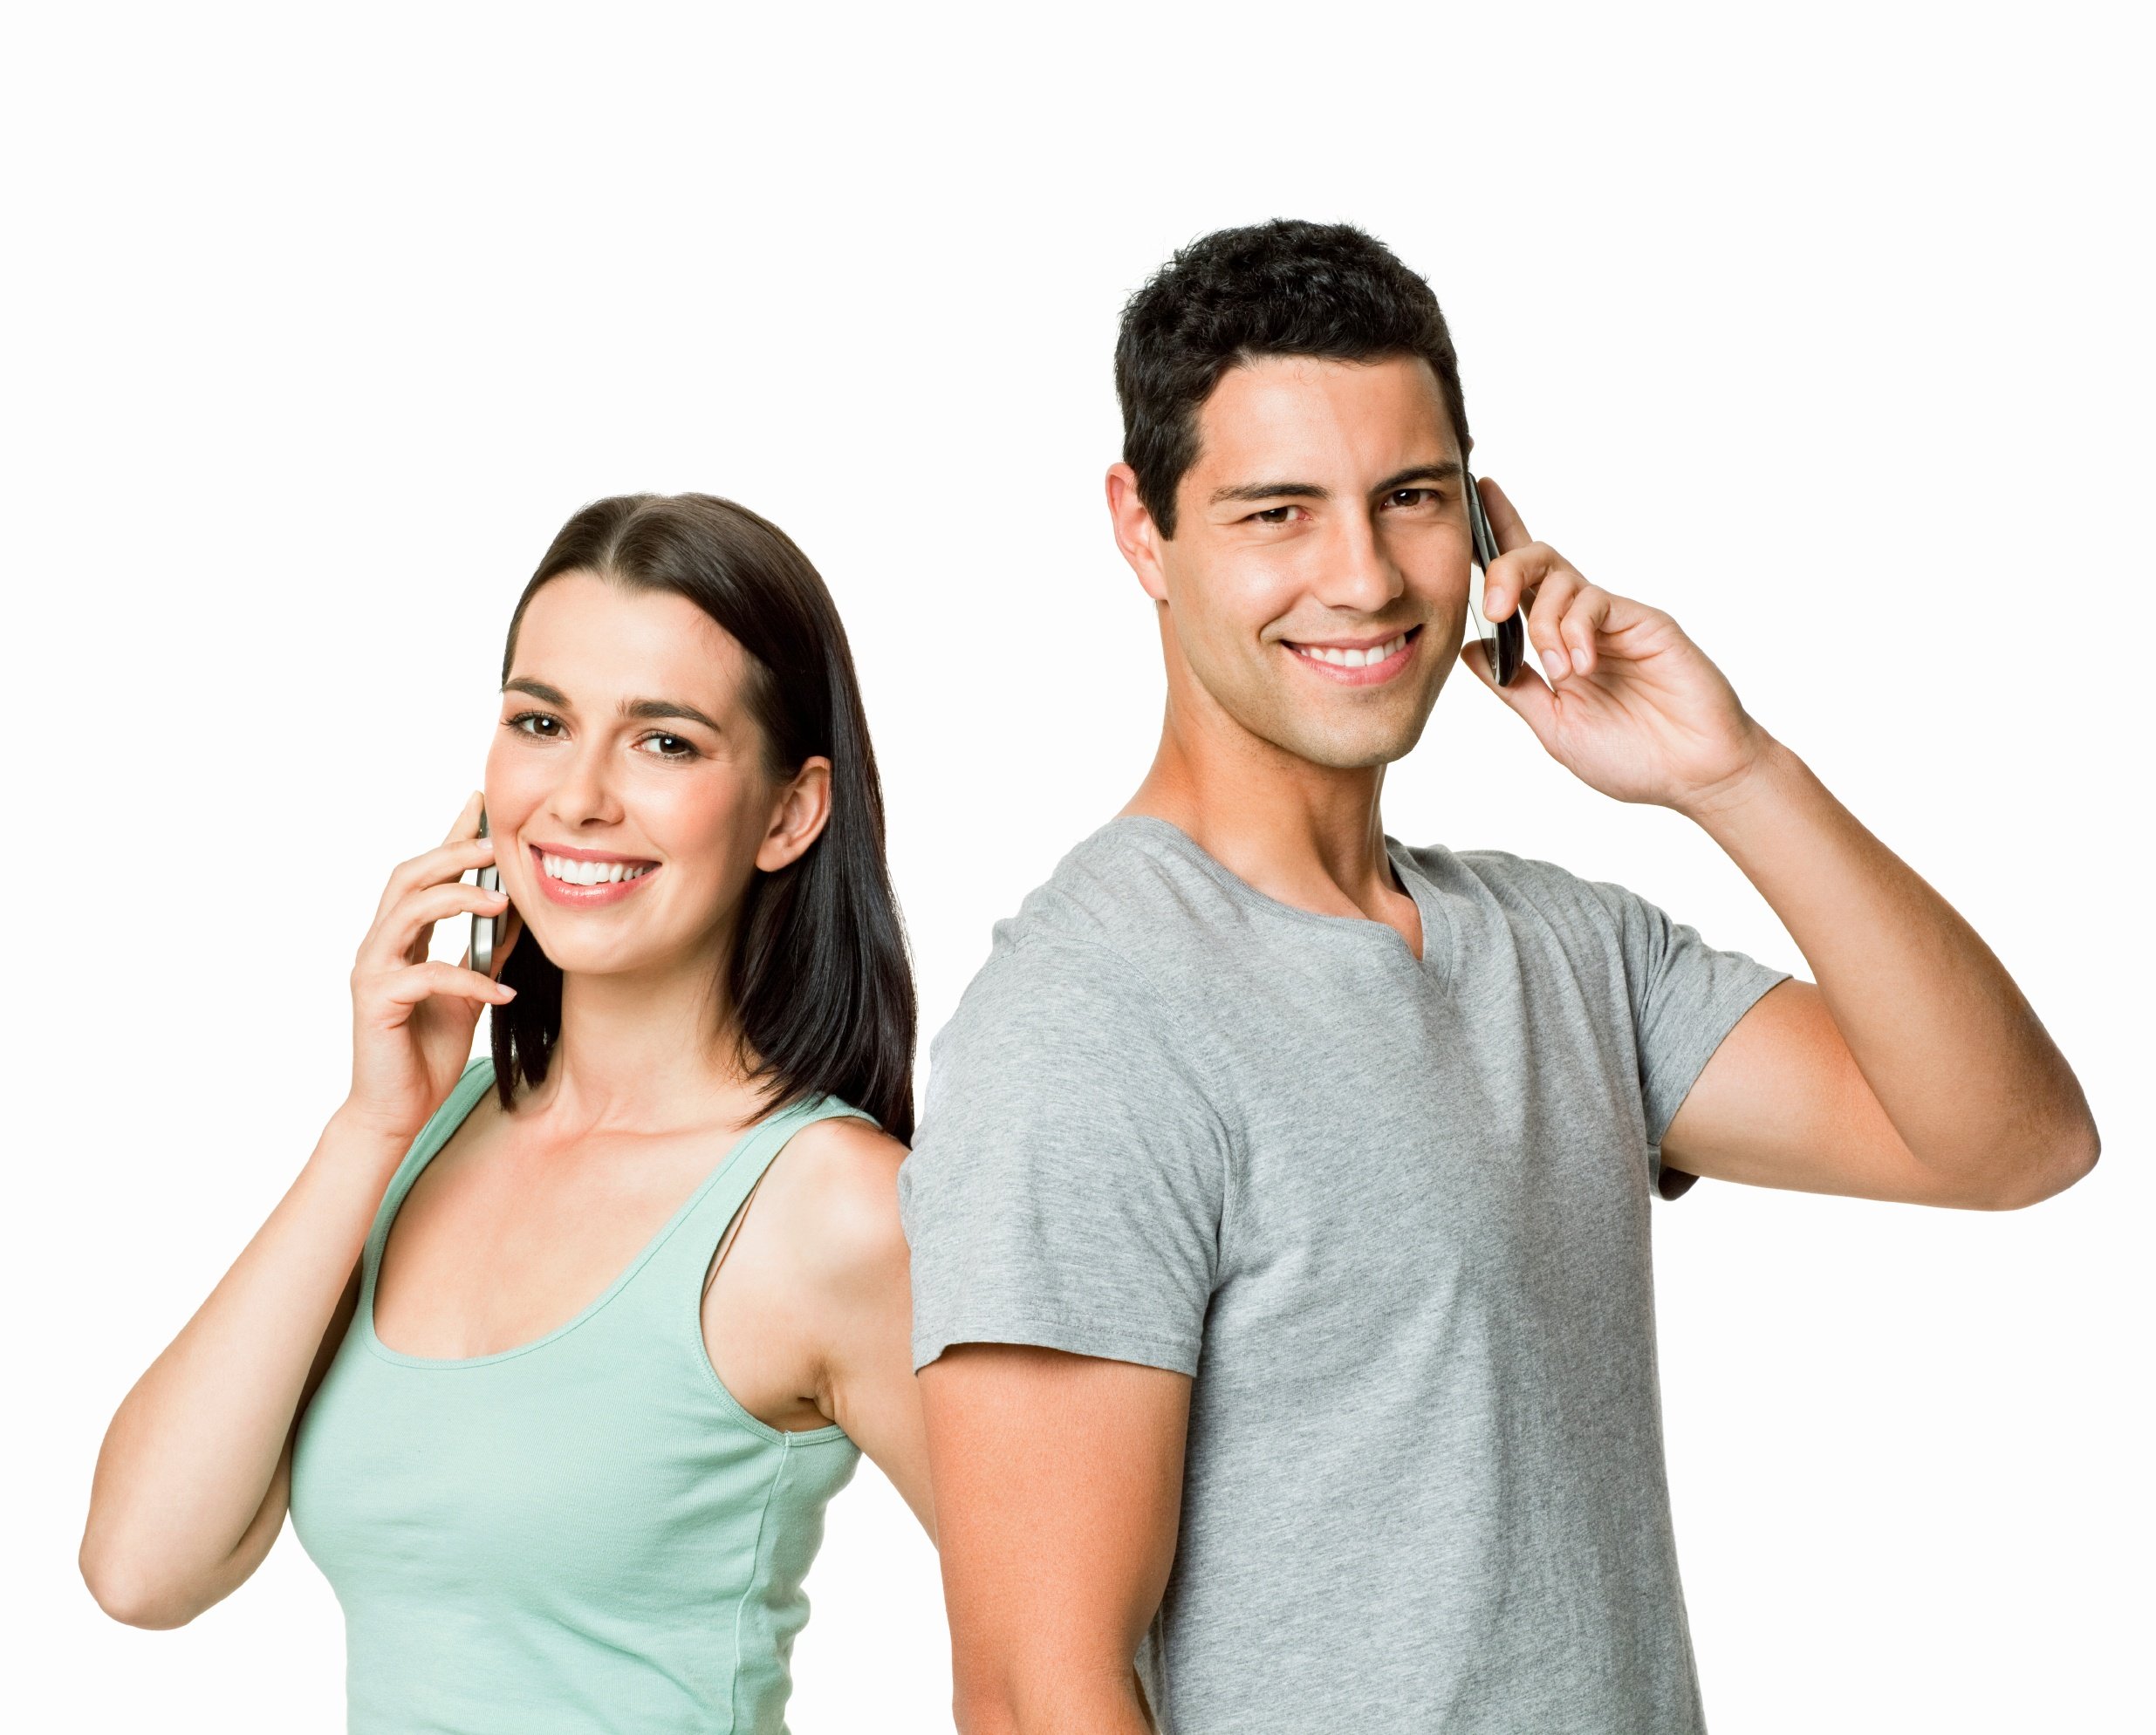 couple with phones to ears.jpg